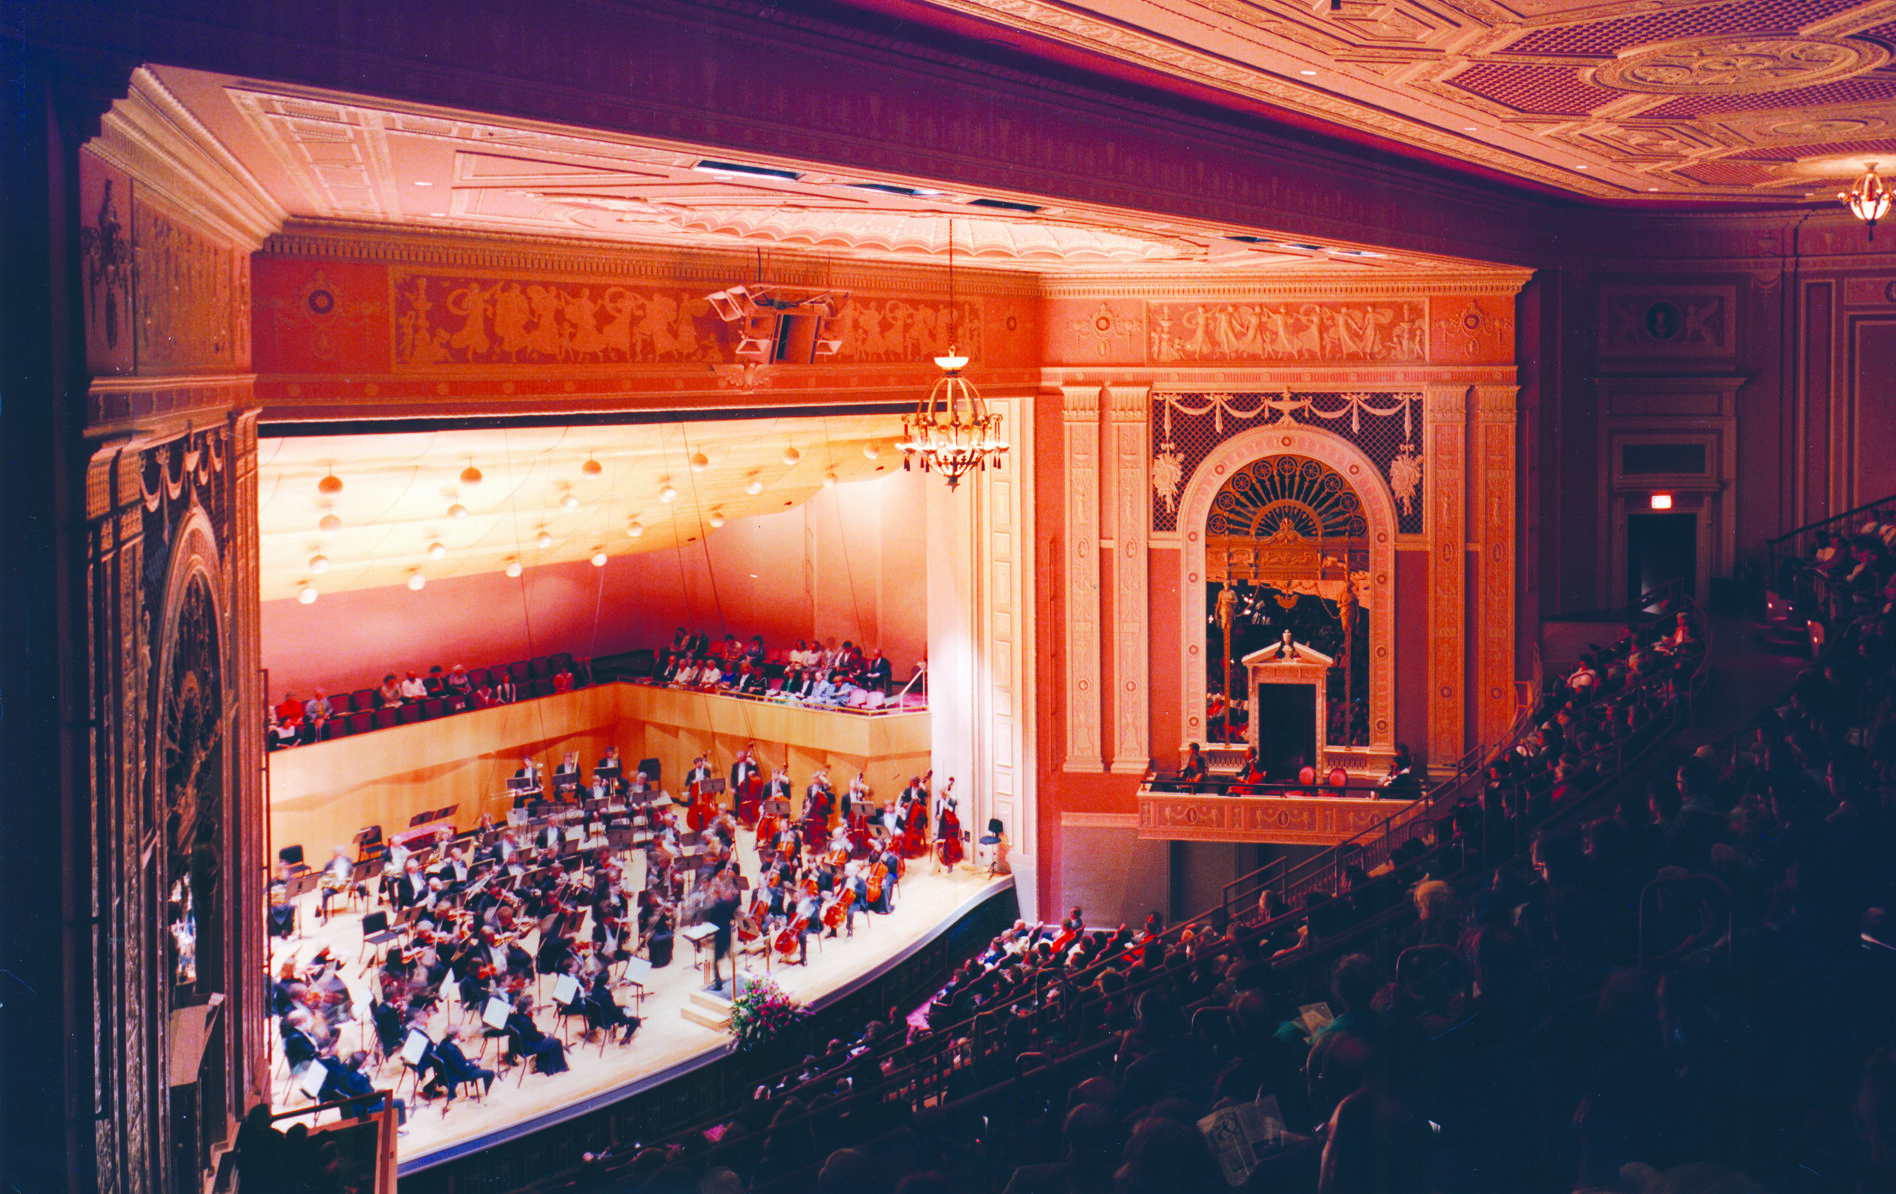 indianapolis symphonic orchestra schedule 2019